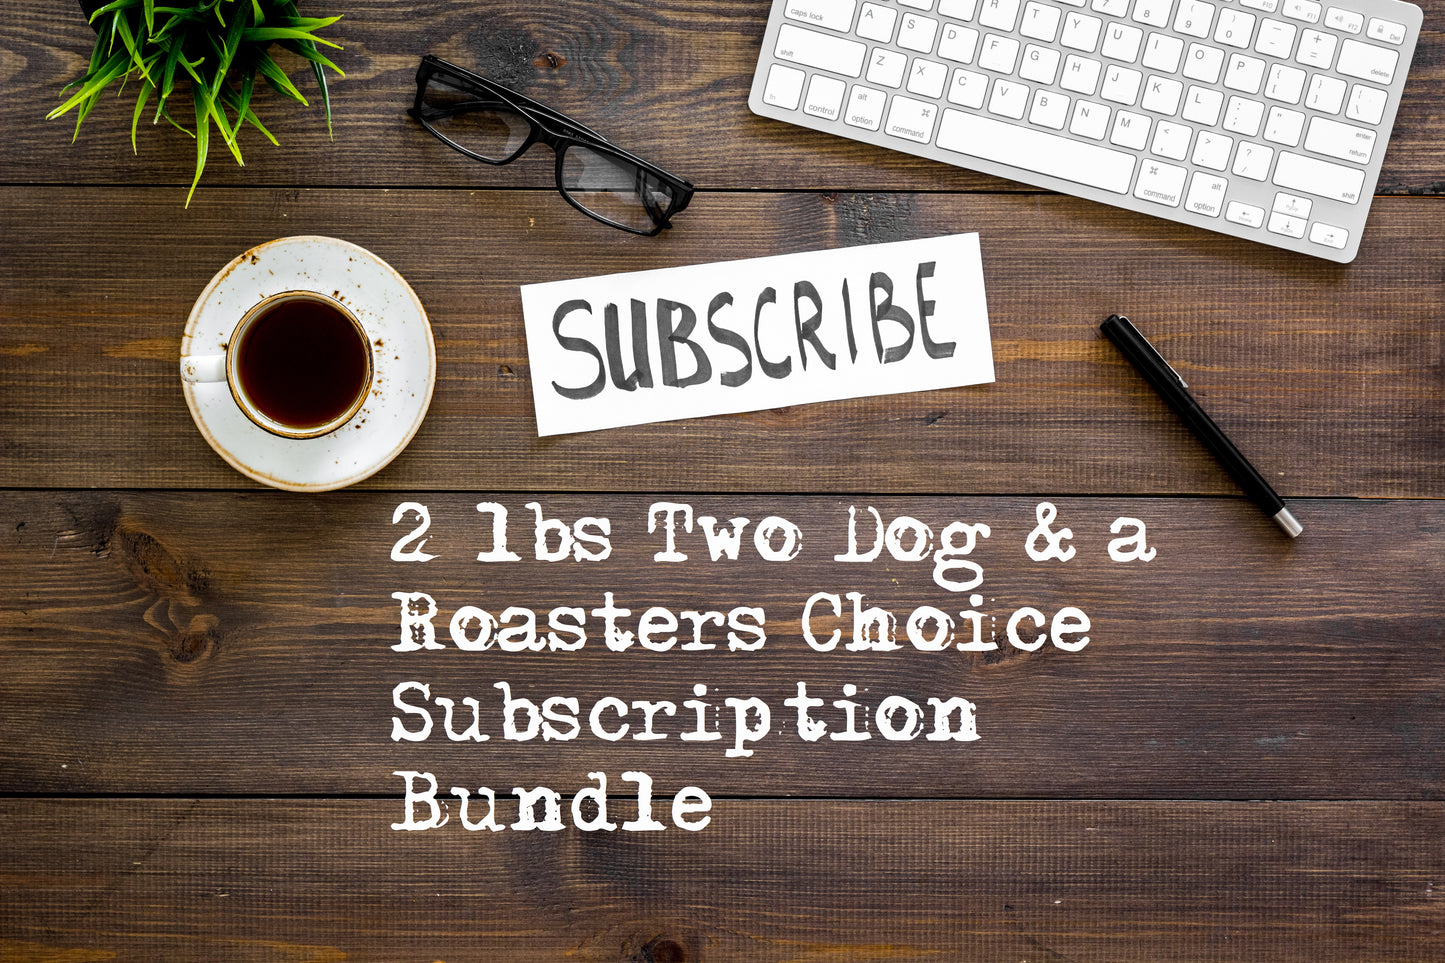 Two Dog Blend & Roasters Choice 3lbs Subscription Bundle